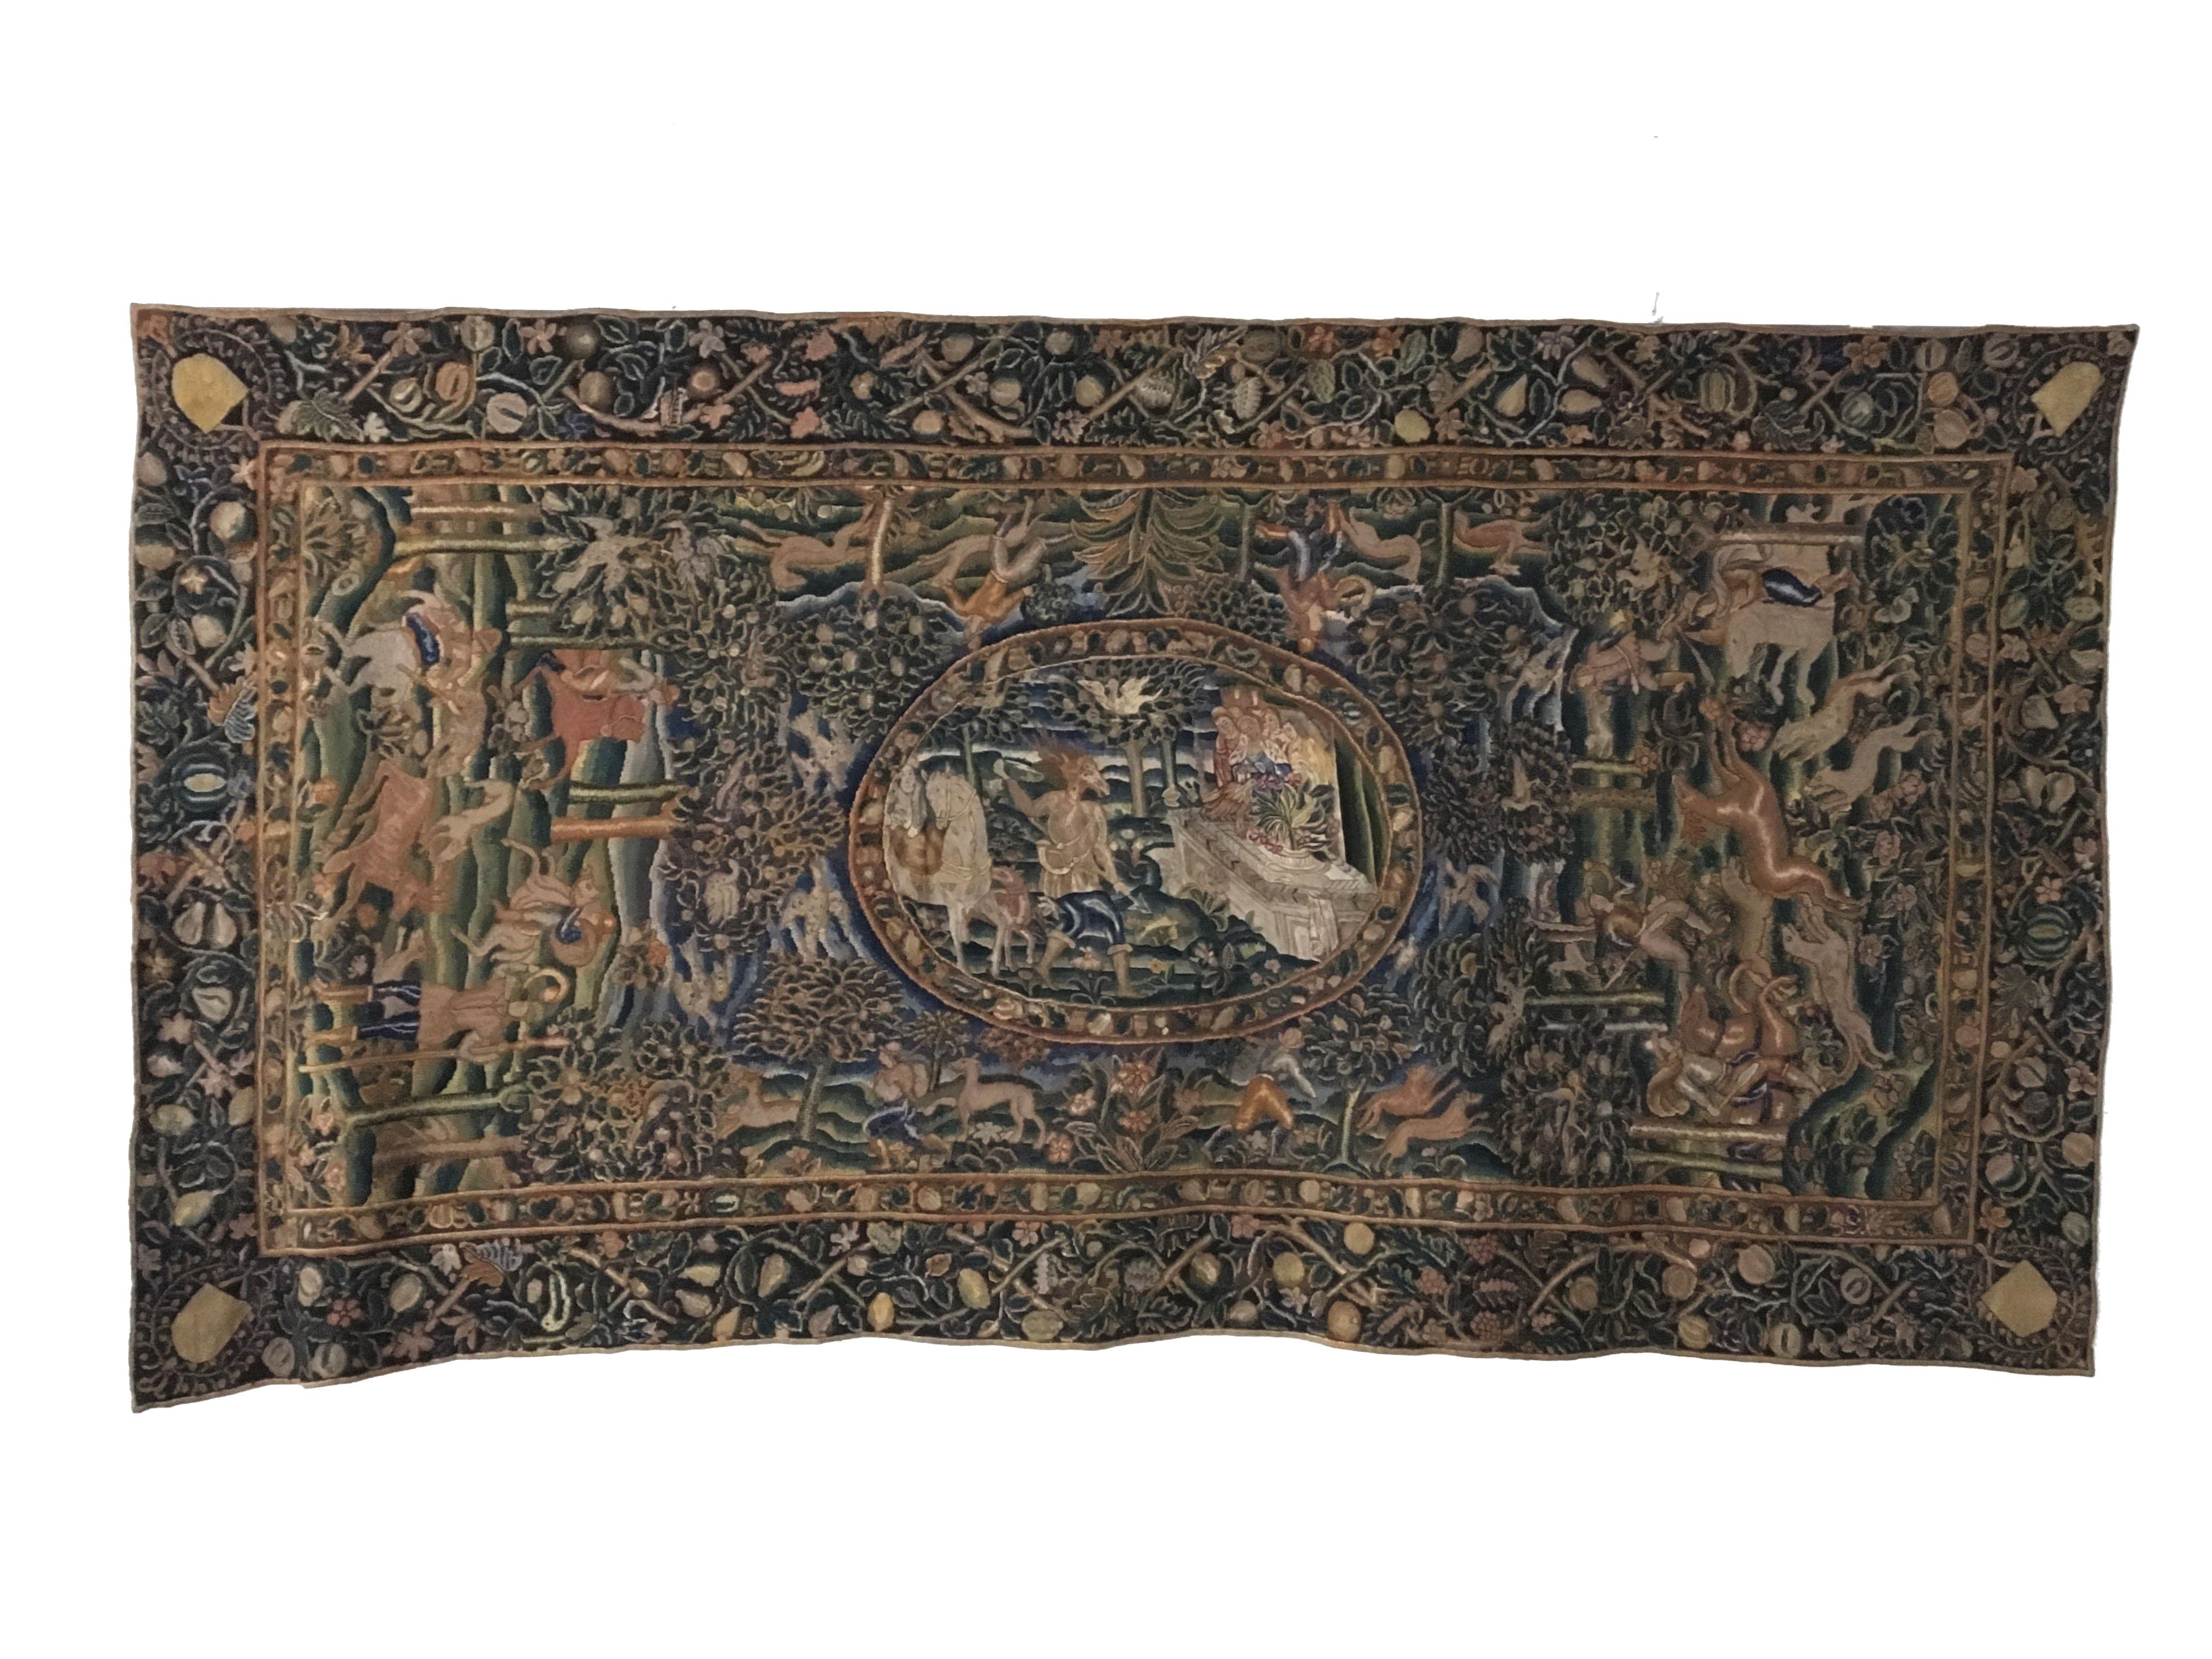 A fine and very rare 17th century table tapestry worked in richly colored silks and wools. The oval allegorical centre panel depicting Artemis & Acteon, on a field of woodland with huntsmen and dogs in pursuit of stags either side and birds flying